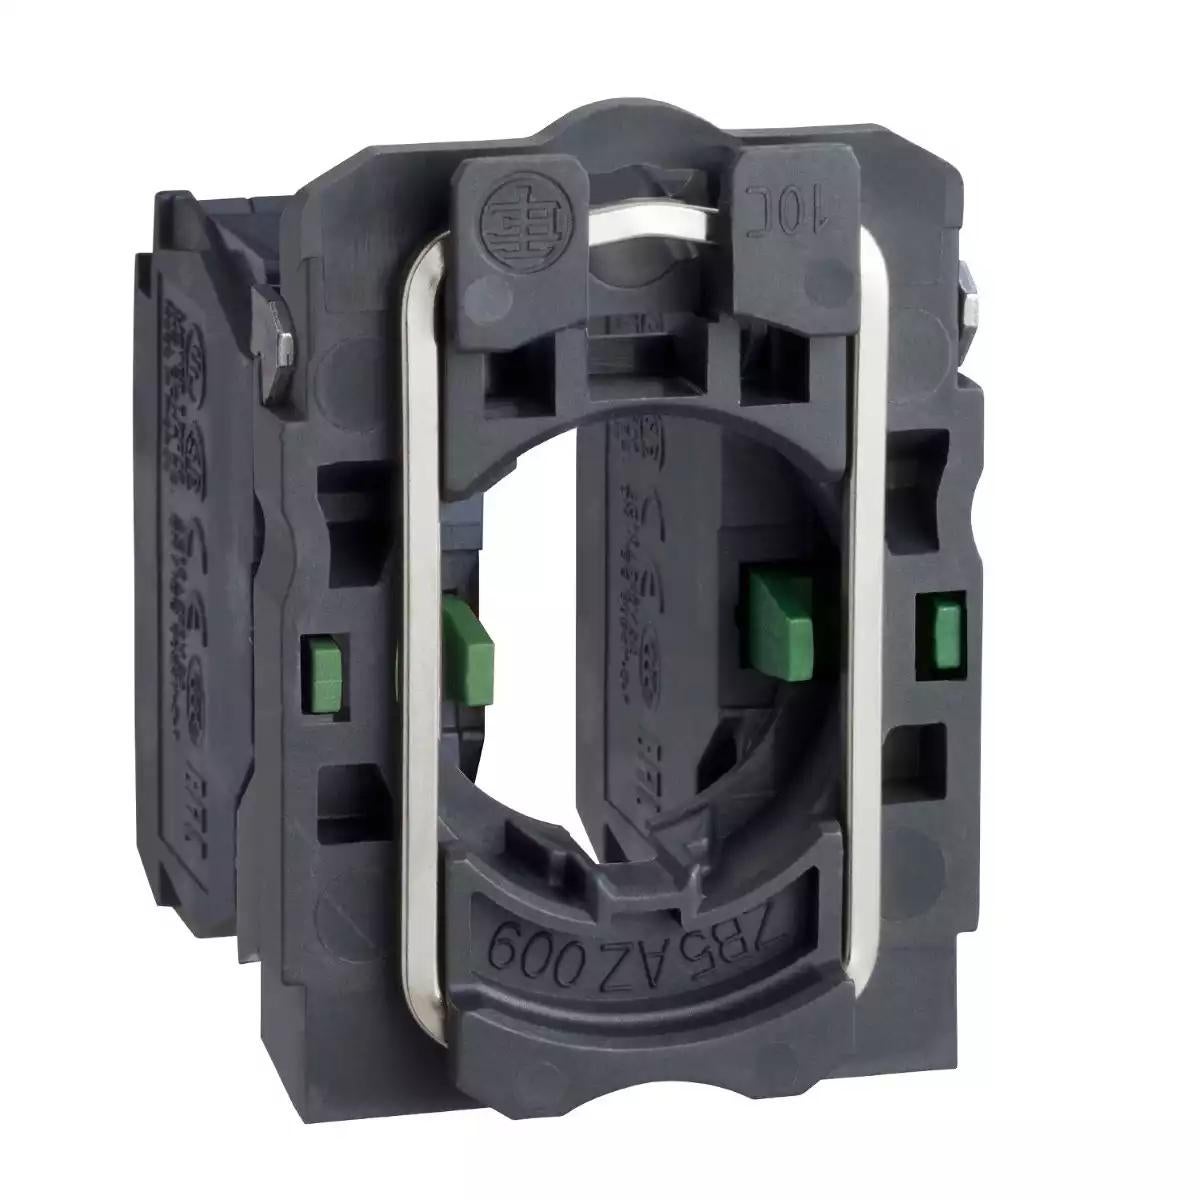 Schneider Electric Harmony XB5 single contact block with body/fixing collar 2NO screw clamp terminal